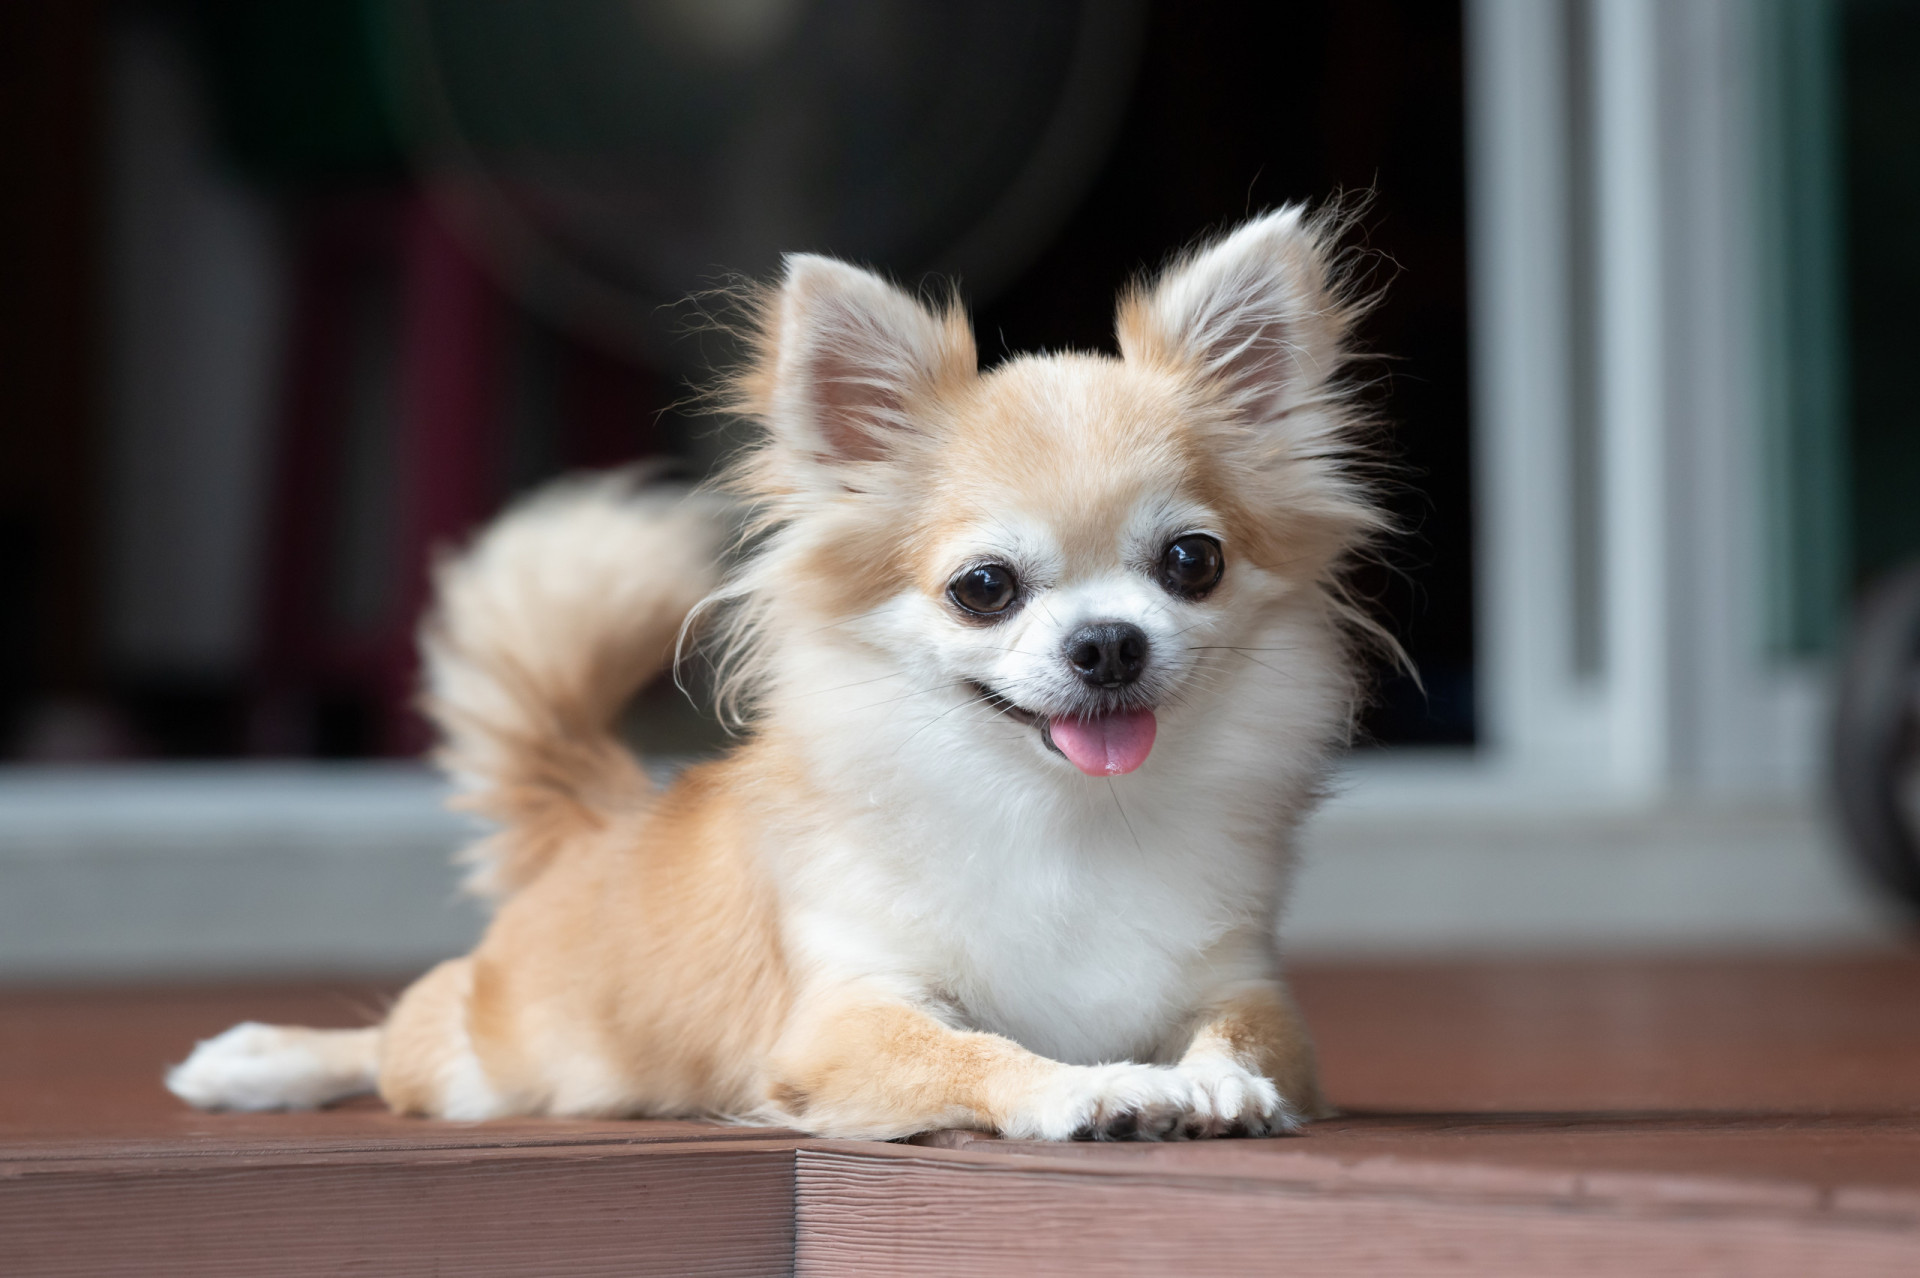 <p>These tiny canines have one of the longest life spans in the dog world, living to be around 17 years old. They're gentle and patient with children and require little exercise because of their size.</p><p><a href="https://www.msn.com/en-us/community/channel/vid-7xx8mnucu55yw63we9va2gwr7uihbxwc68fxqp25x6tg4ftibpra?cvid=94631541bc0f4f89bfd59158d696ad7e">Follow us and access great exclusive content every day</a></p>